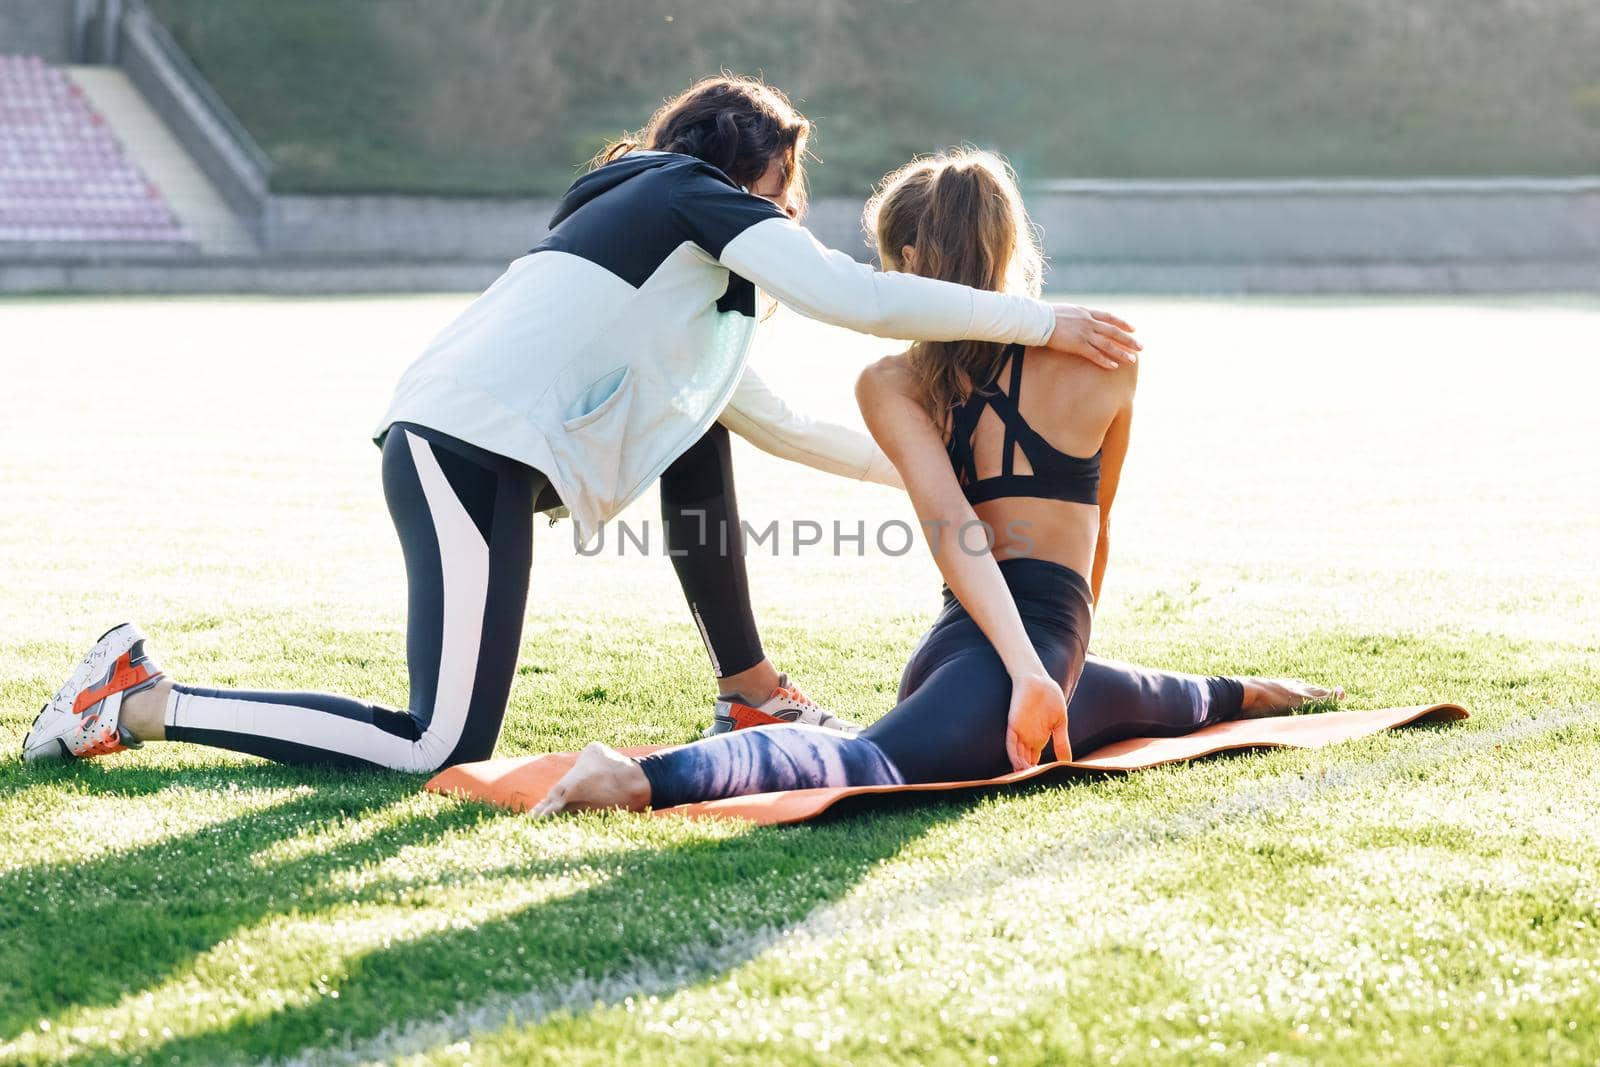 Physiotherapy and recovery. Rehabilitation concept. Physiotherapist expert checking of sportswoman physical treatment for rehabilitation. The doctor works on specific muscle groups or joints by uflypro